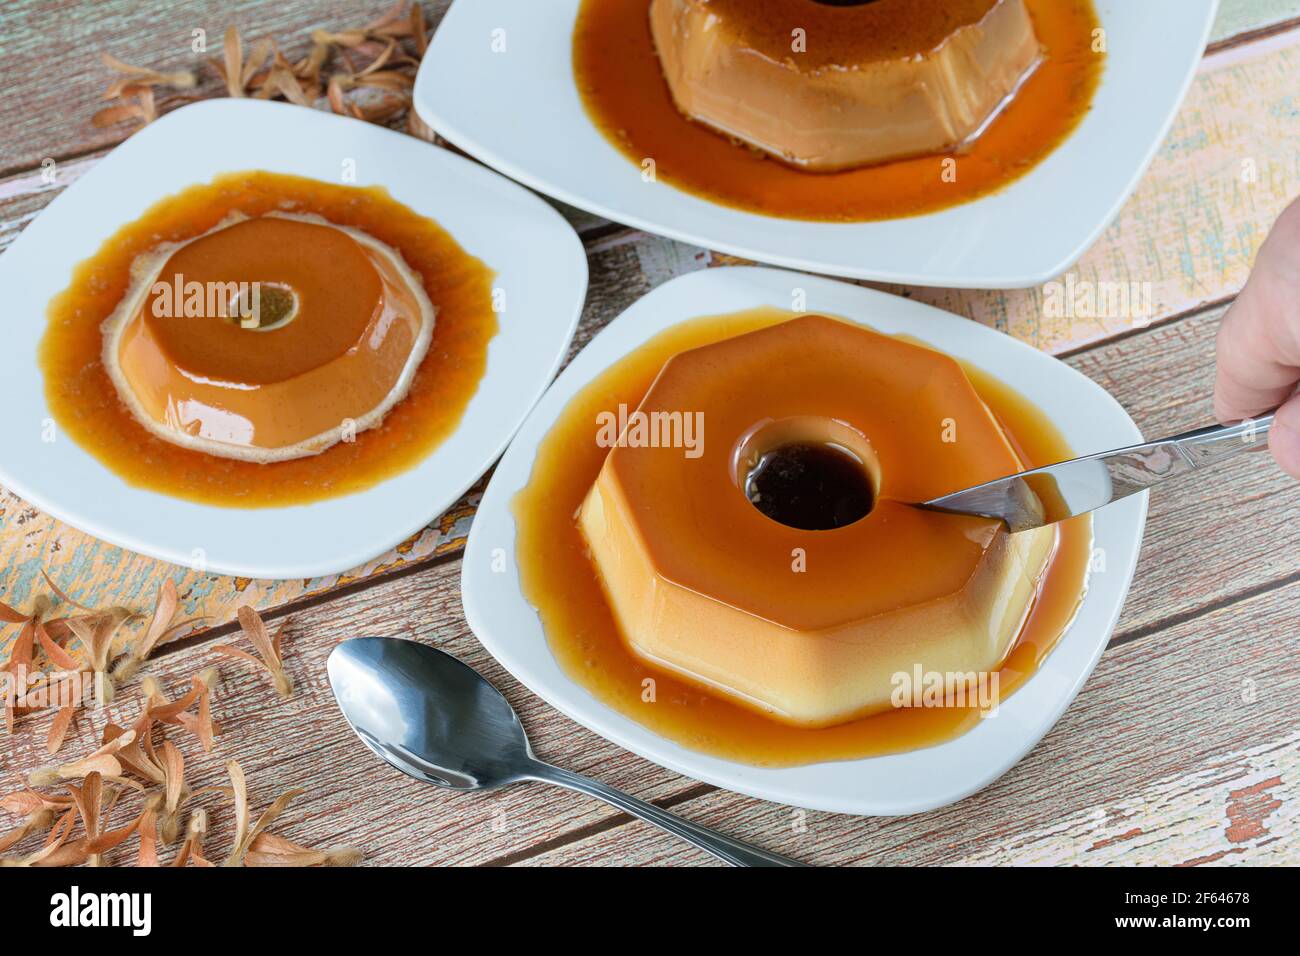 Man cutting a condensed milk pudding with caramel syrup, surrounded by other puddings, spoon and flying seeds (Triplaris amaricana). Traditional Brazi Stock Photo